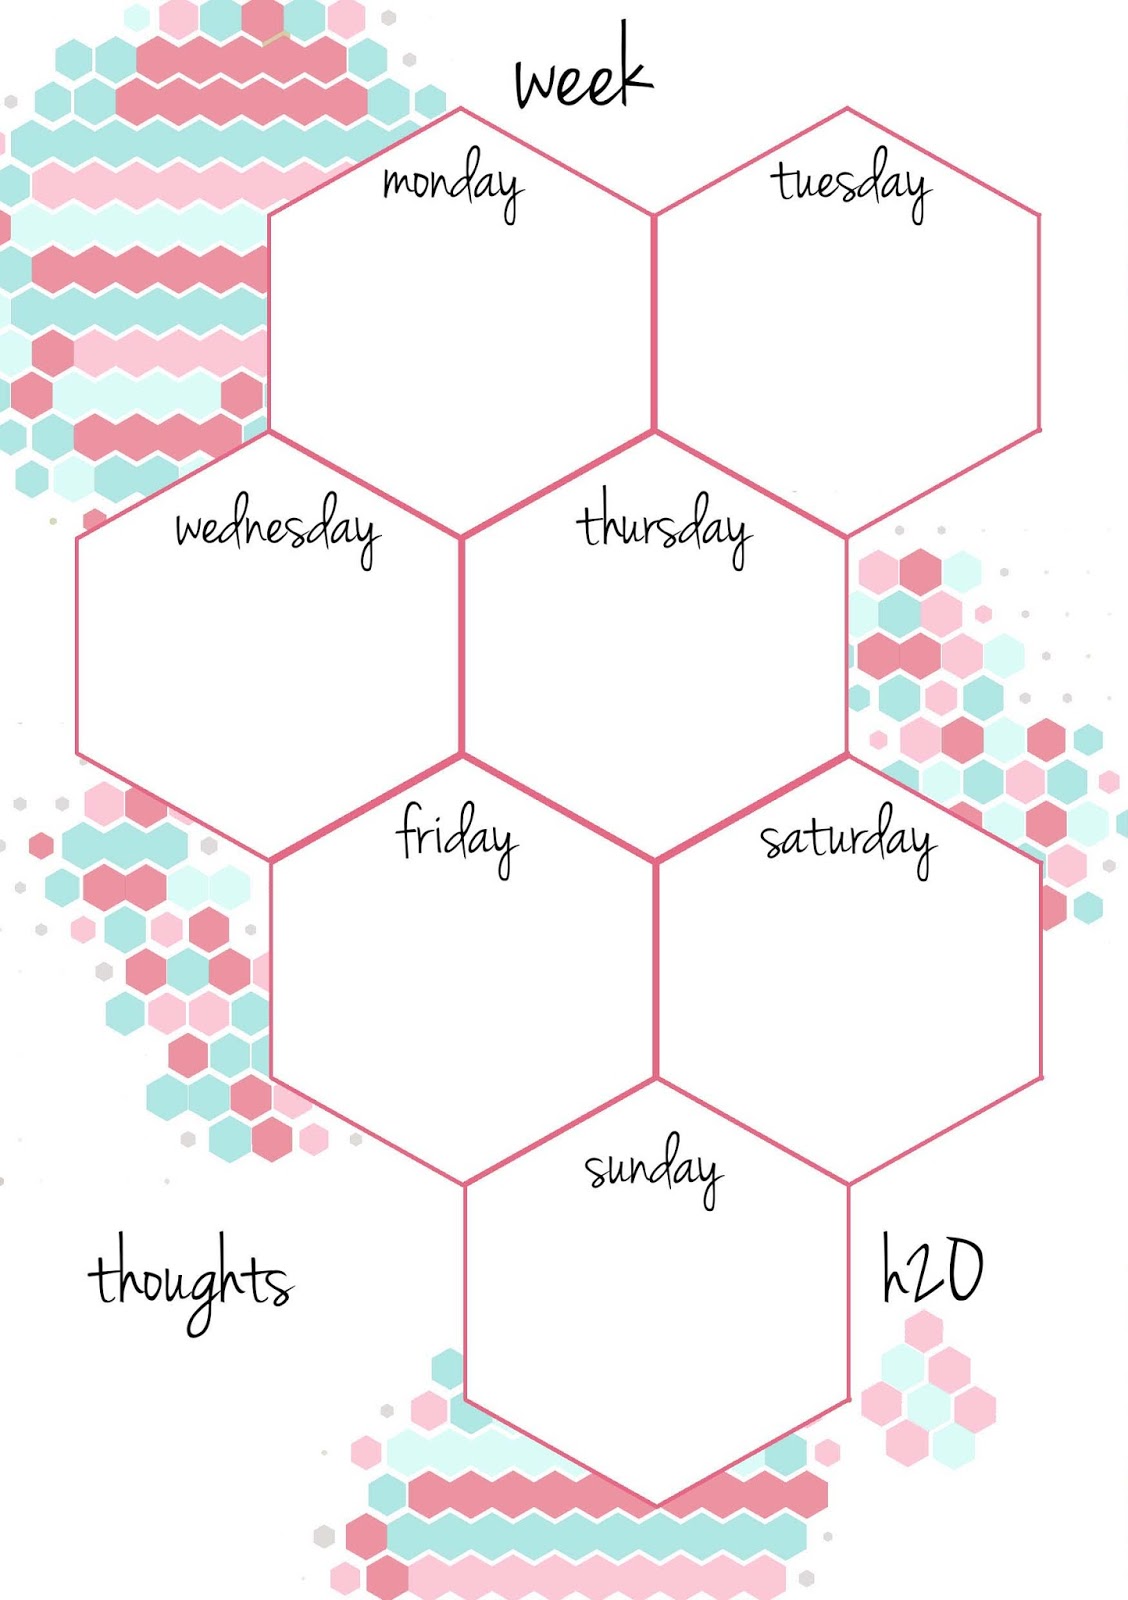 PB And J Studio Free Printable Planner Inserts Candy